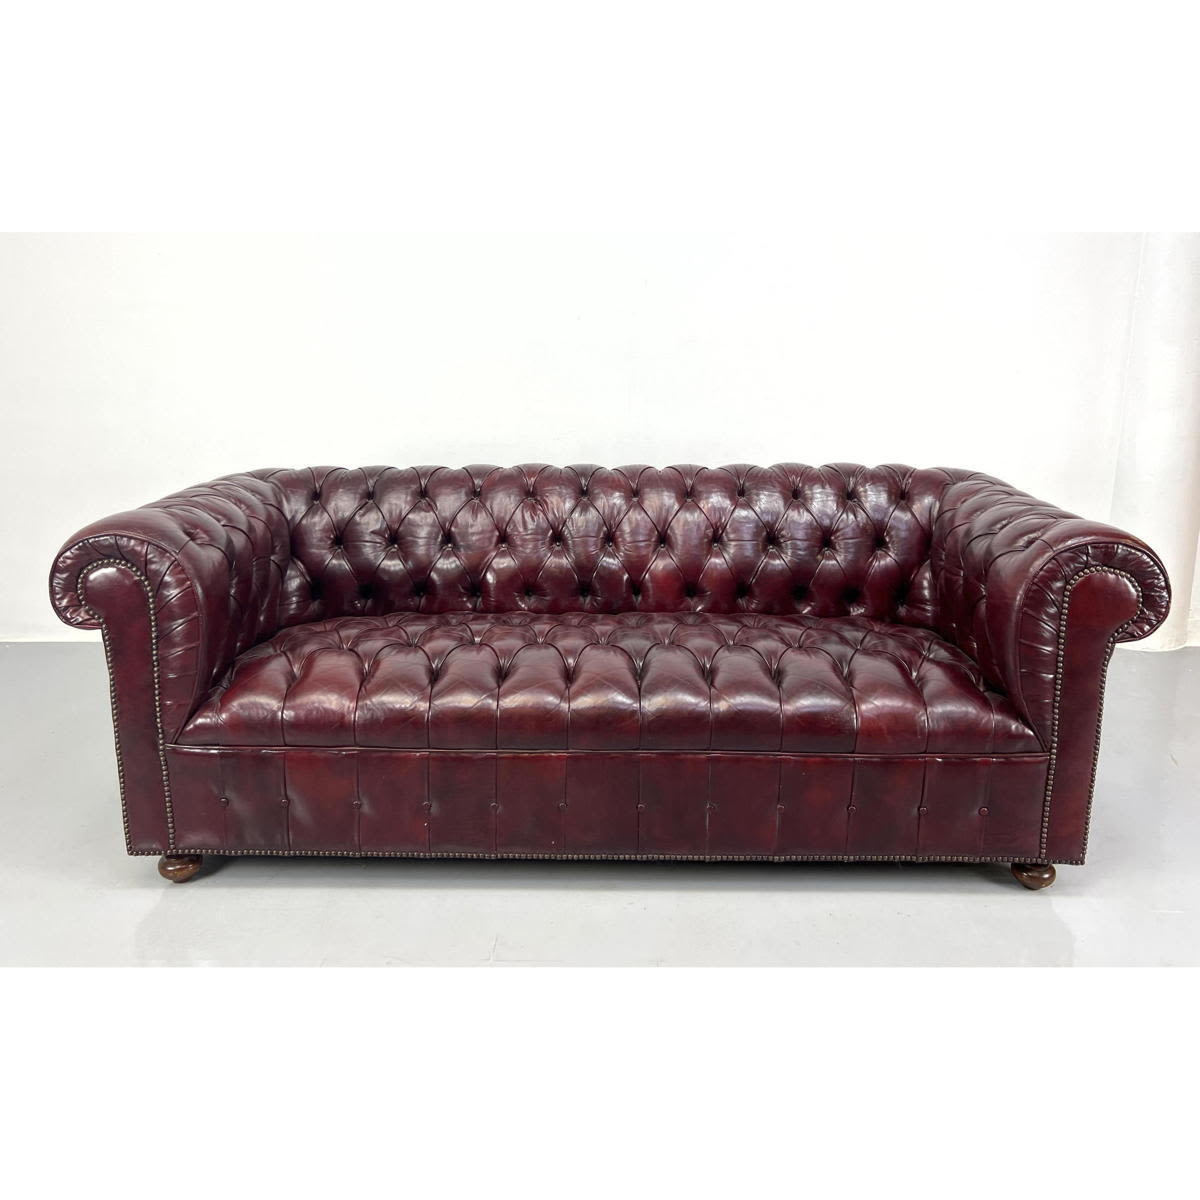 Large Chesterfield Sofa Couch. Tufted.